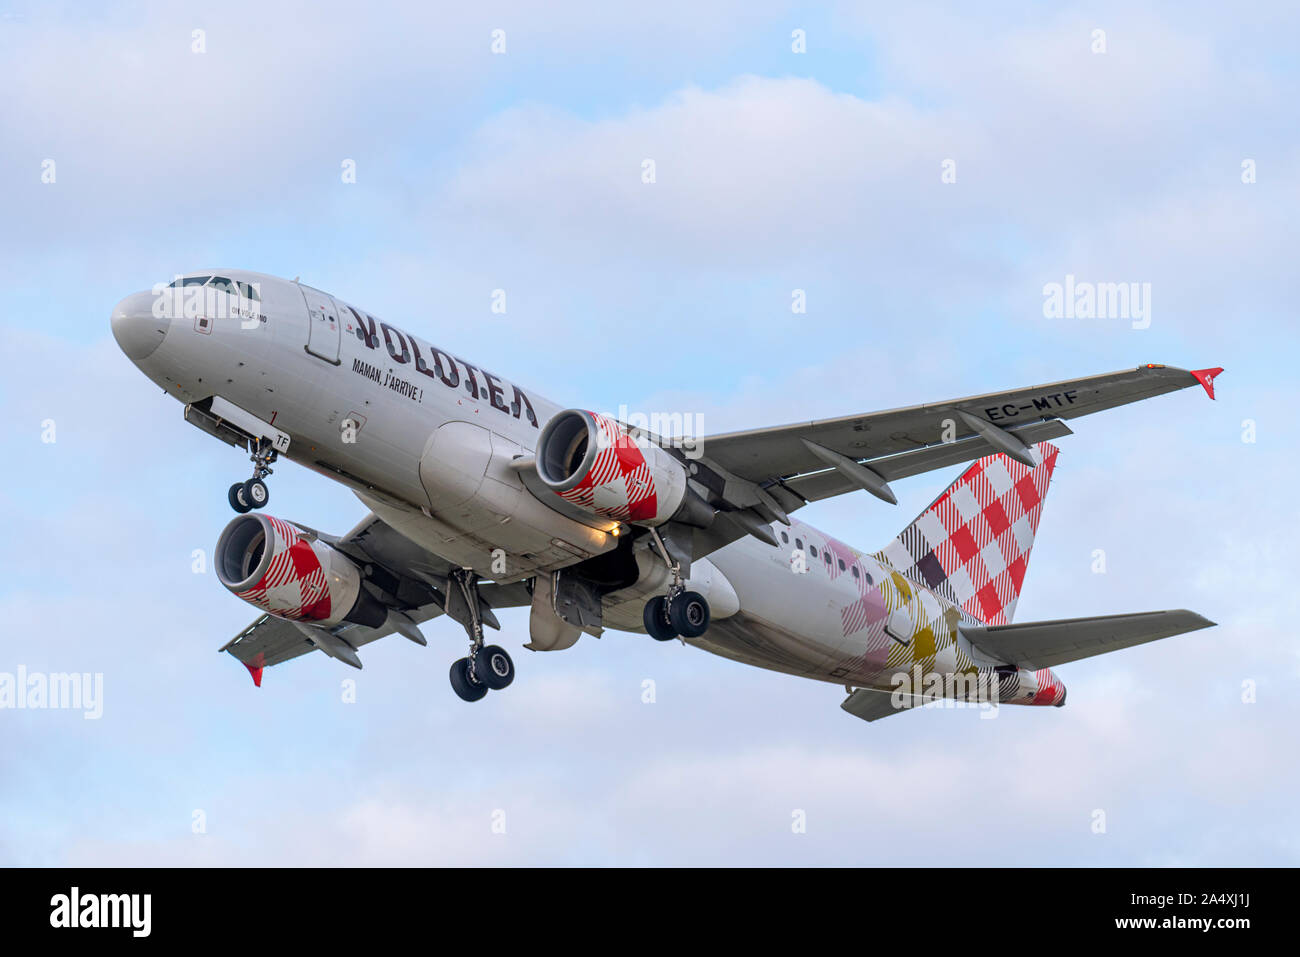 Volotea Airbus A319 jet airliner plane EC-MTF taking off at London Southend Airport, Southend on Sea Essex, UK. Spanish budget airline Stock Photo